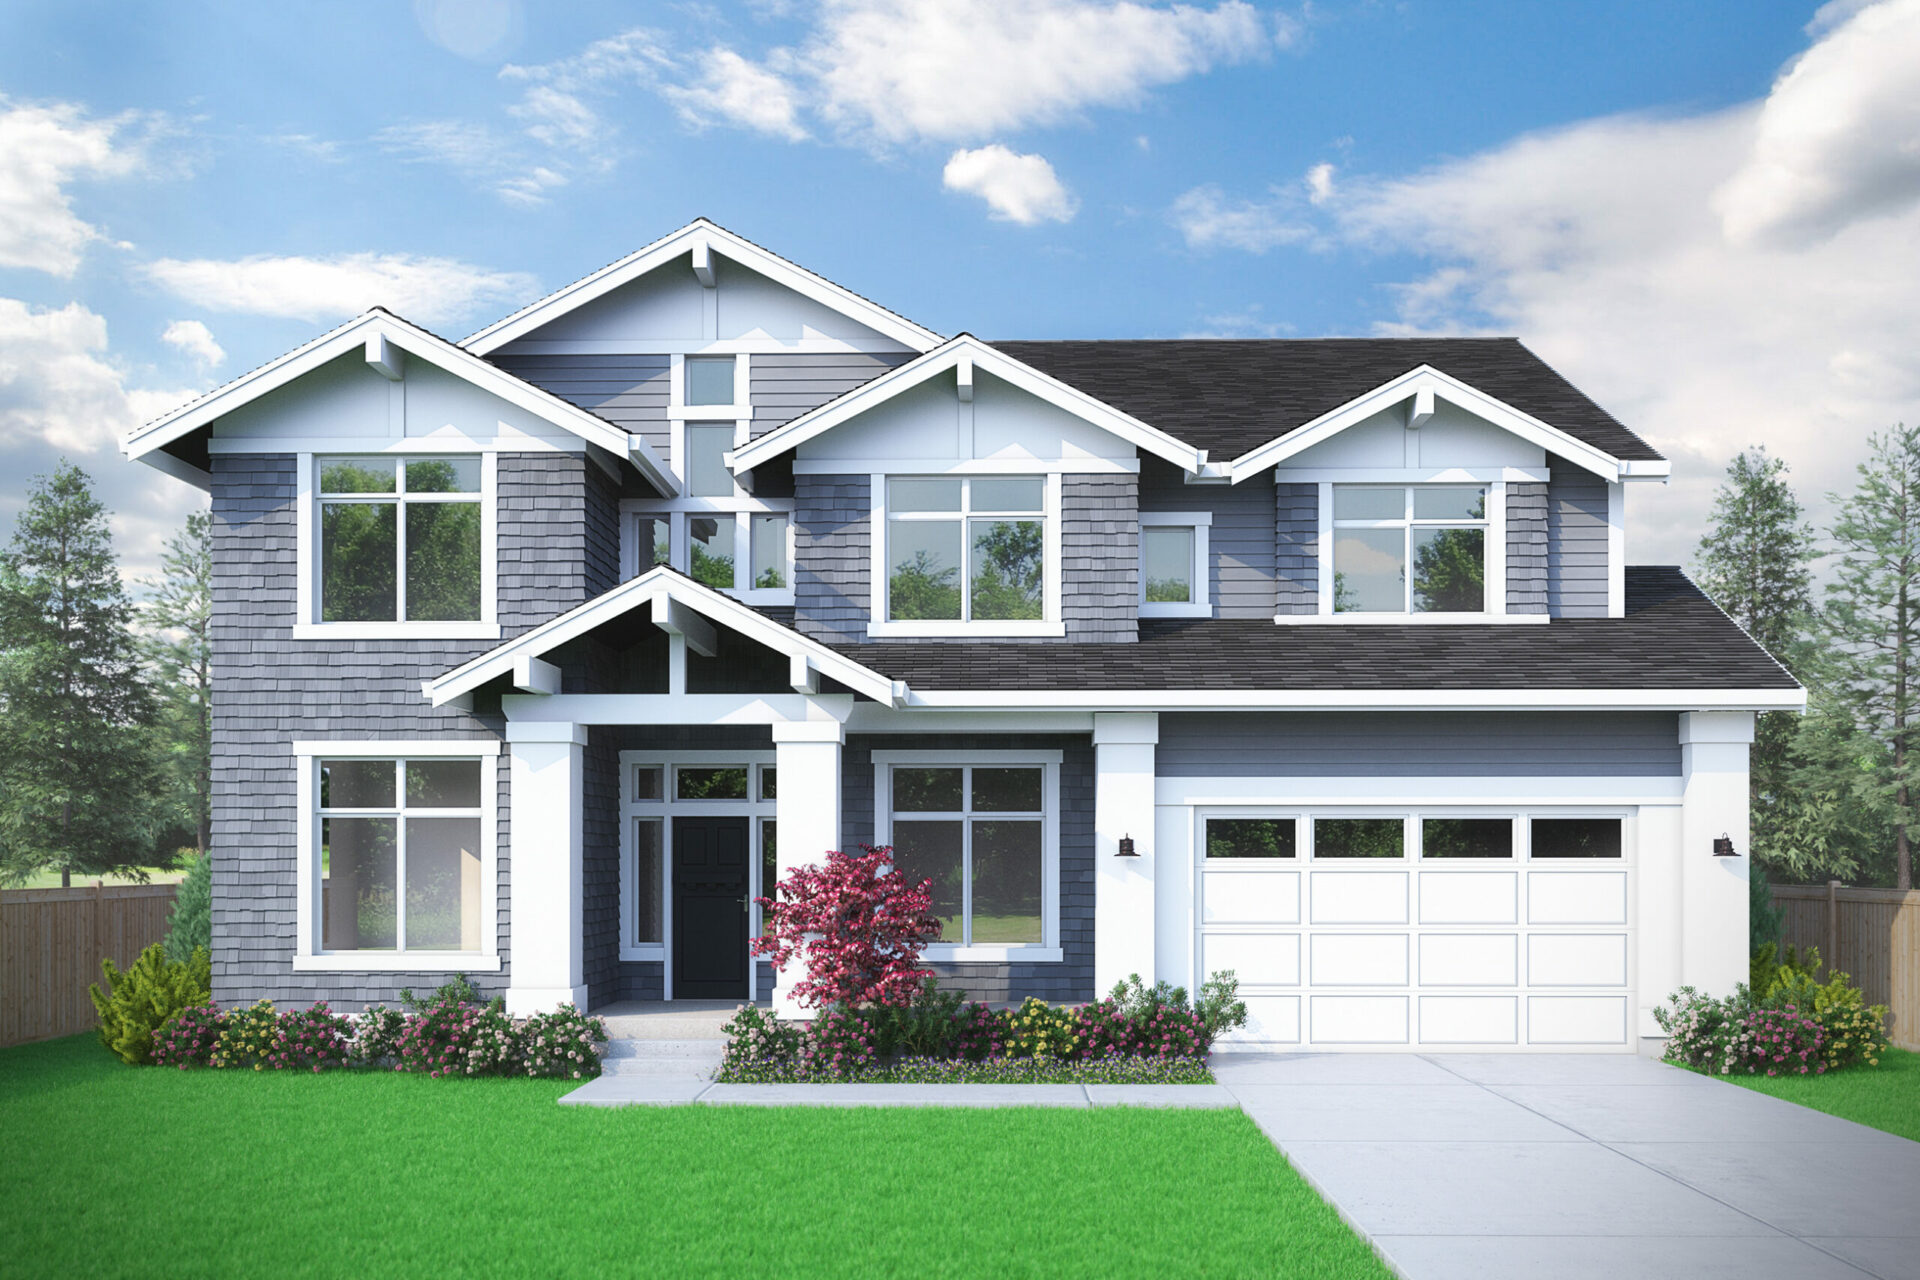 View our new luxury home construction on 8405 NE 140th St, in Kirkland, WA from MN Custom Home